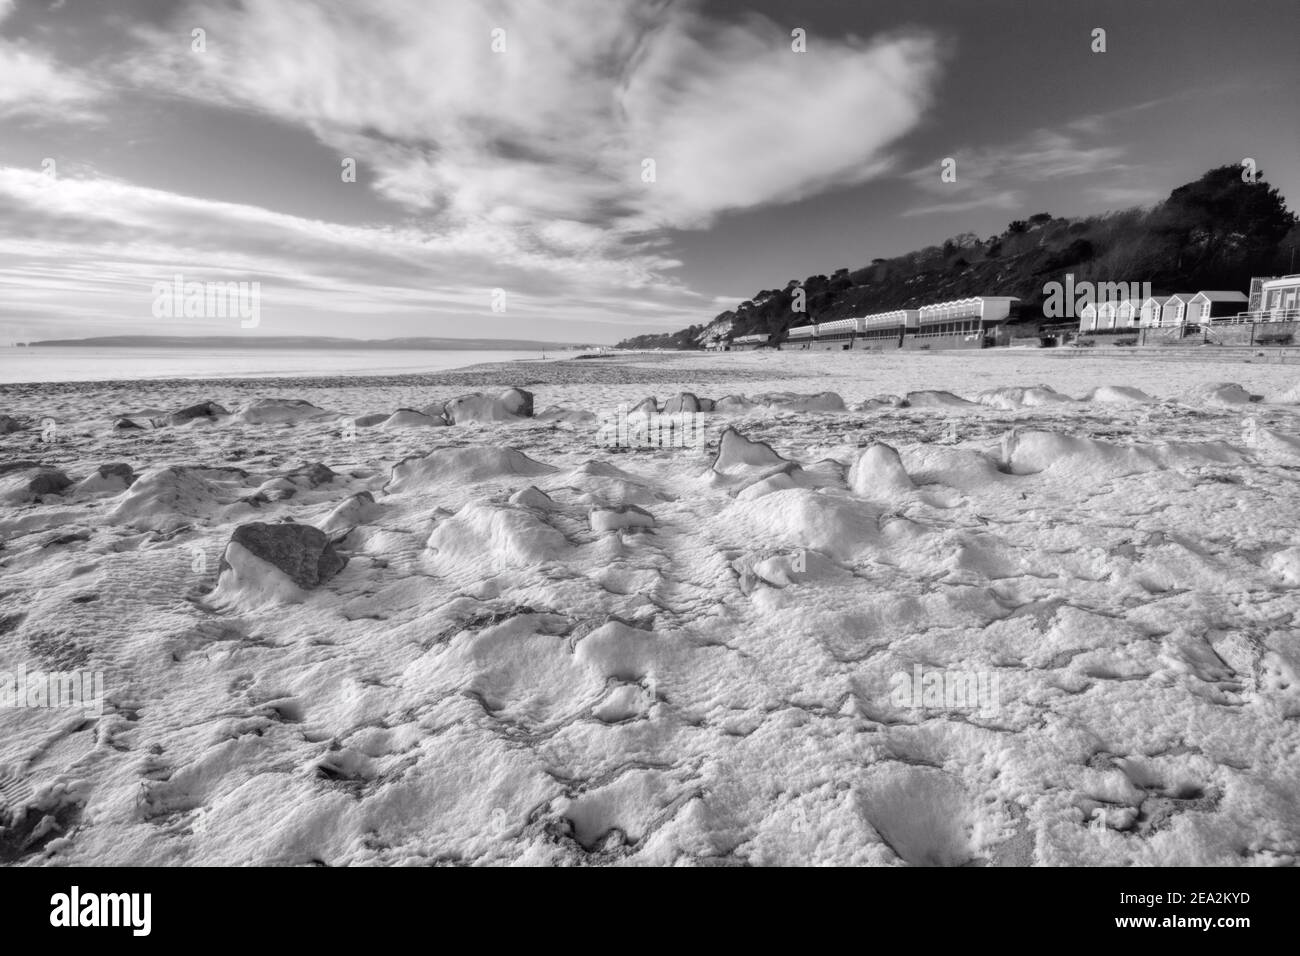 Scribbles - A sprinkling of snow on sand - Poole, Dorset Stock Photo